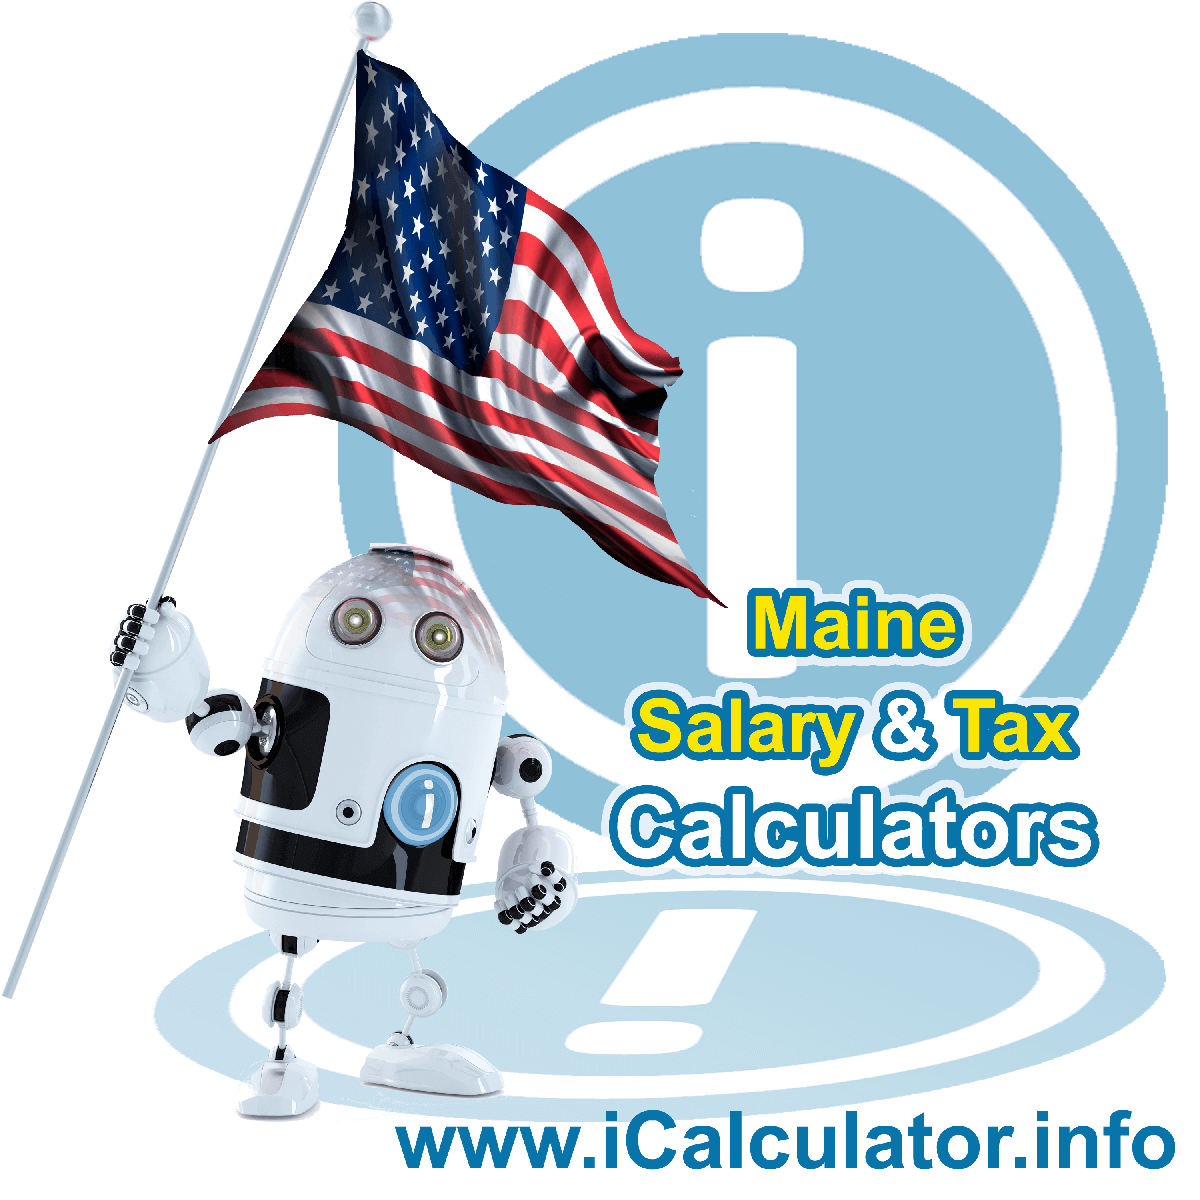 Maine Salary Calculator 2022 | iCalculator™ | The Maine Salary Calculator allows you to quickly calculate your salary after tax including Maine State Tax, Federal State Tax, Medicare Deductions, Social Security, Capital Gains and other income tax and salary deductions complete with supporting Maine state tax tables 